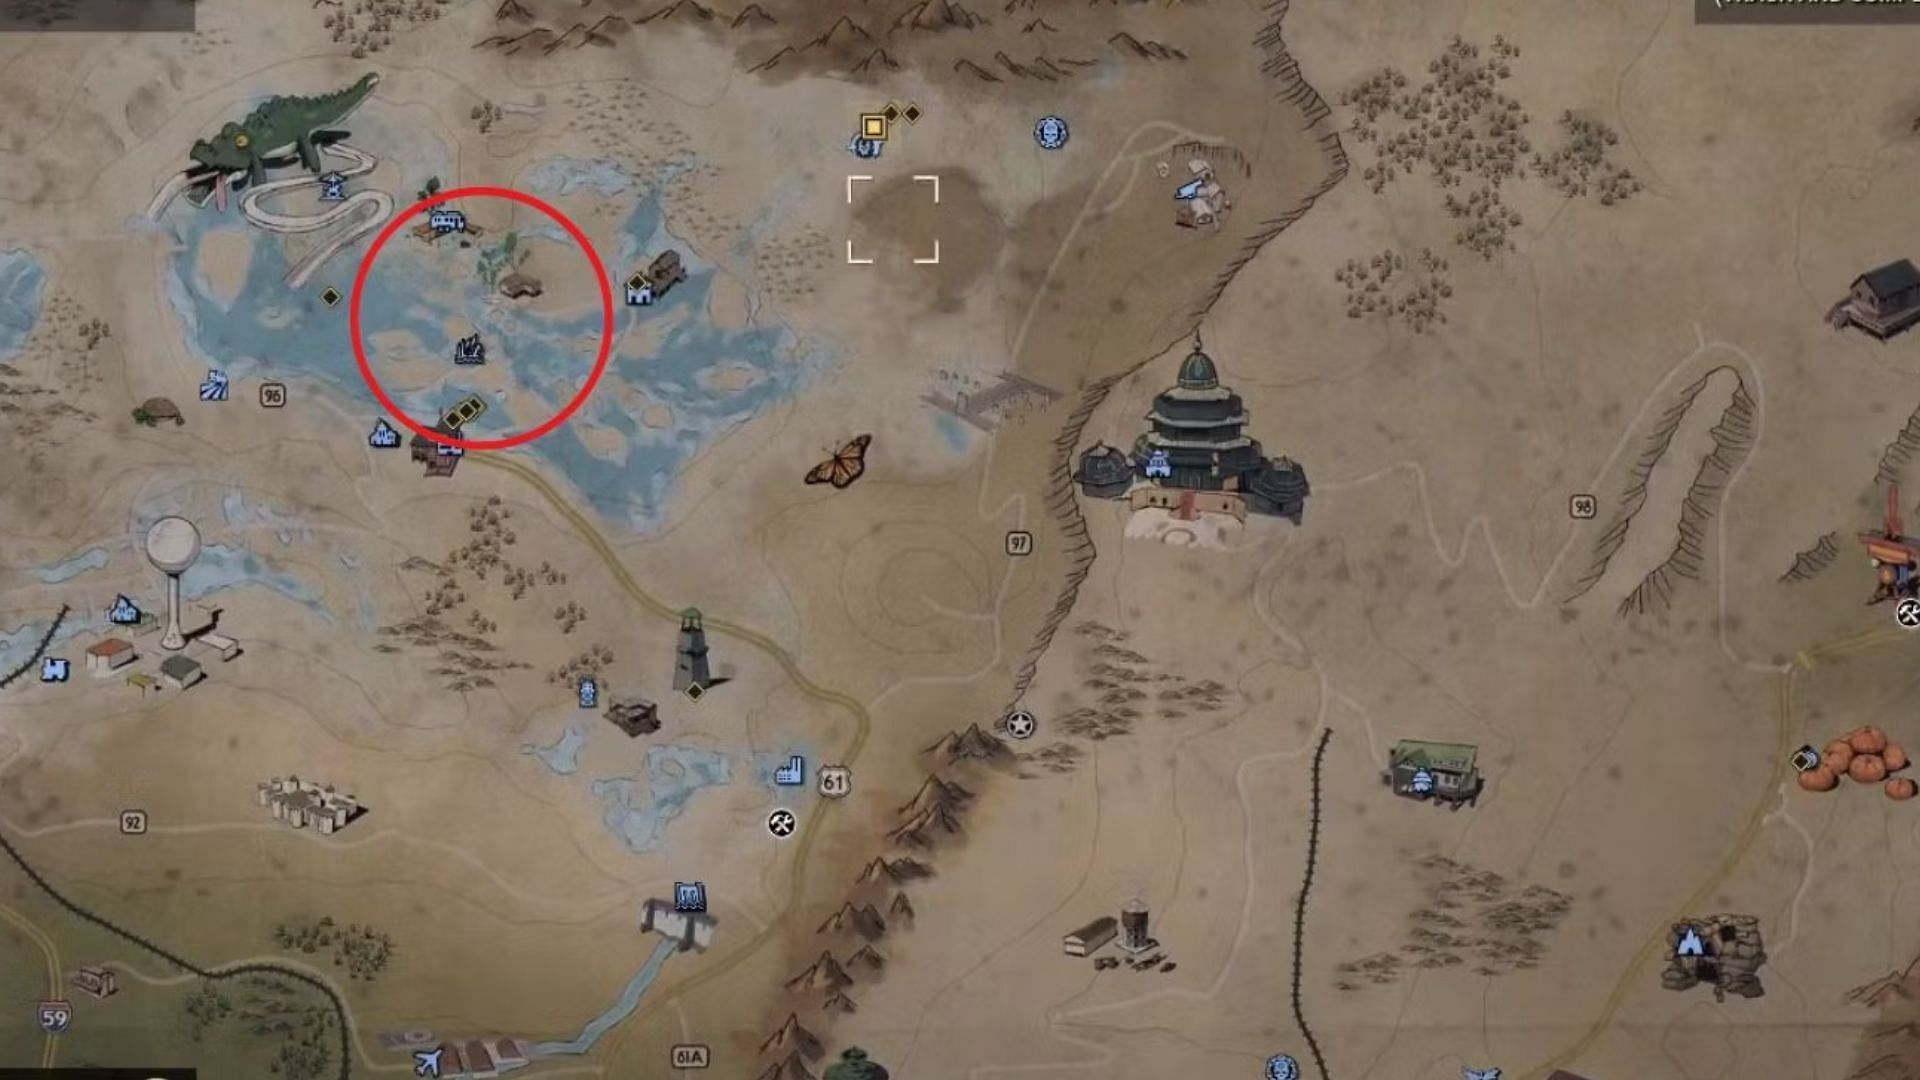 Players can find a lot of reeds in North of Highway 64 by The River Bend. (Image via Bethesda Game Studios)